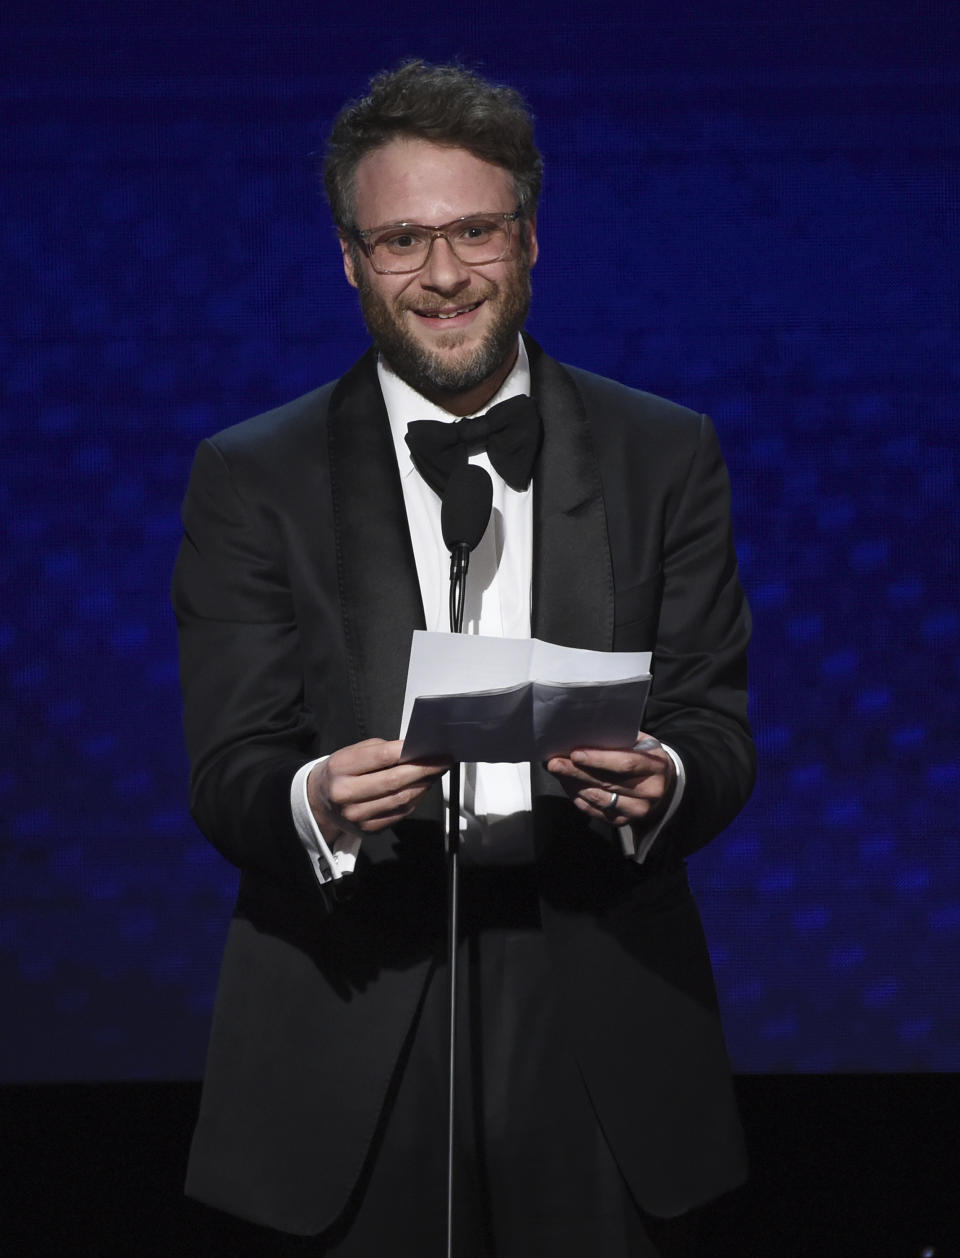 FILE - Seth Rogen speaks at the 33rd American Cinematheque Award honoring Charlize Theron at the Beverly Hilton Hotel on Friday, Nov. 8, 2019, in Beverly Hills, Calif. Rogen turns 40 on April 15. (Photo by Chris Pizzello/Invision/AP, File)